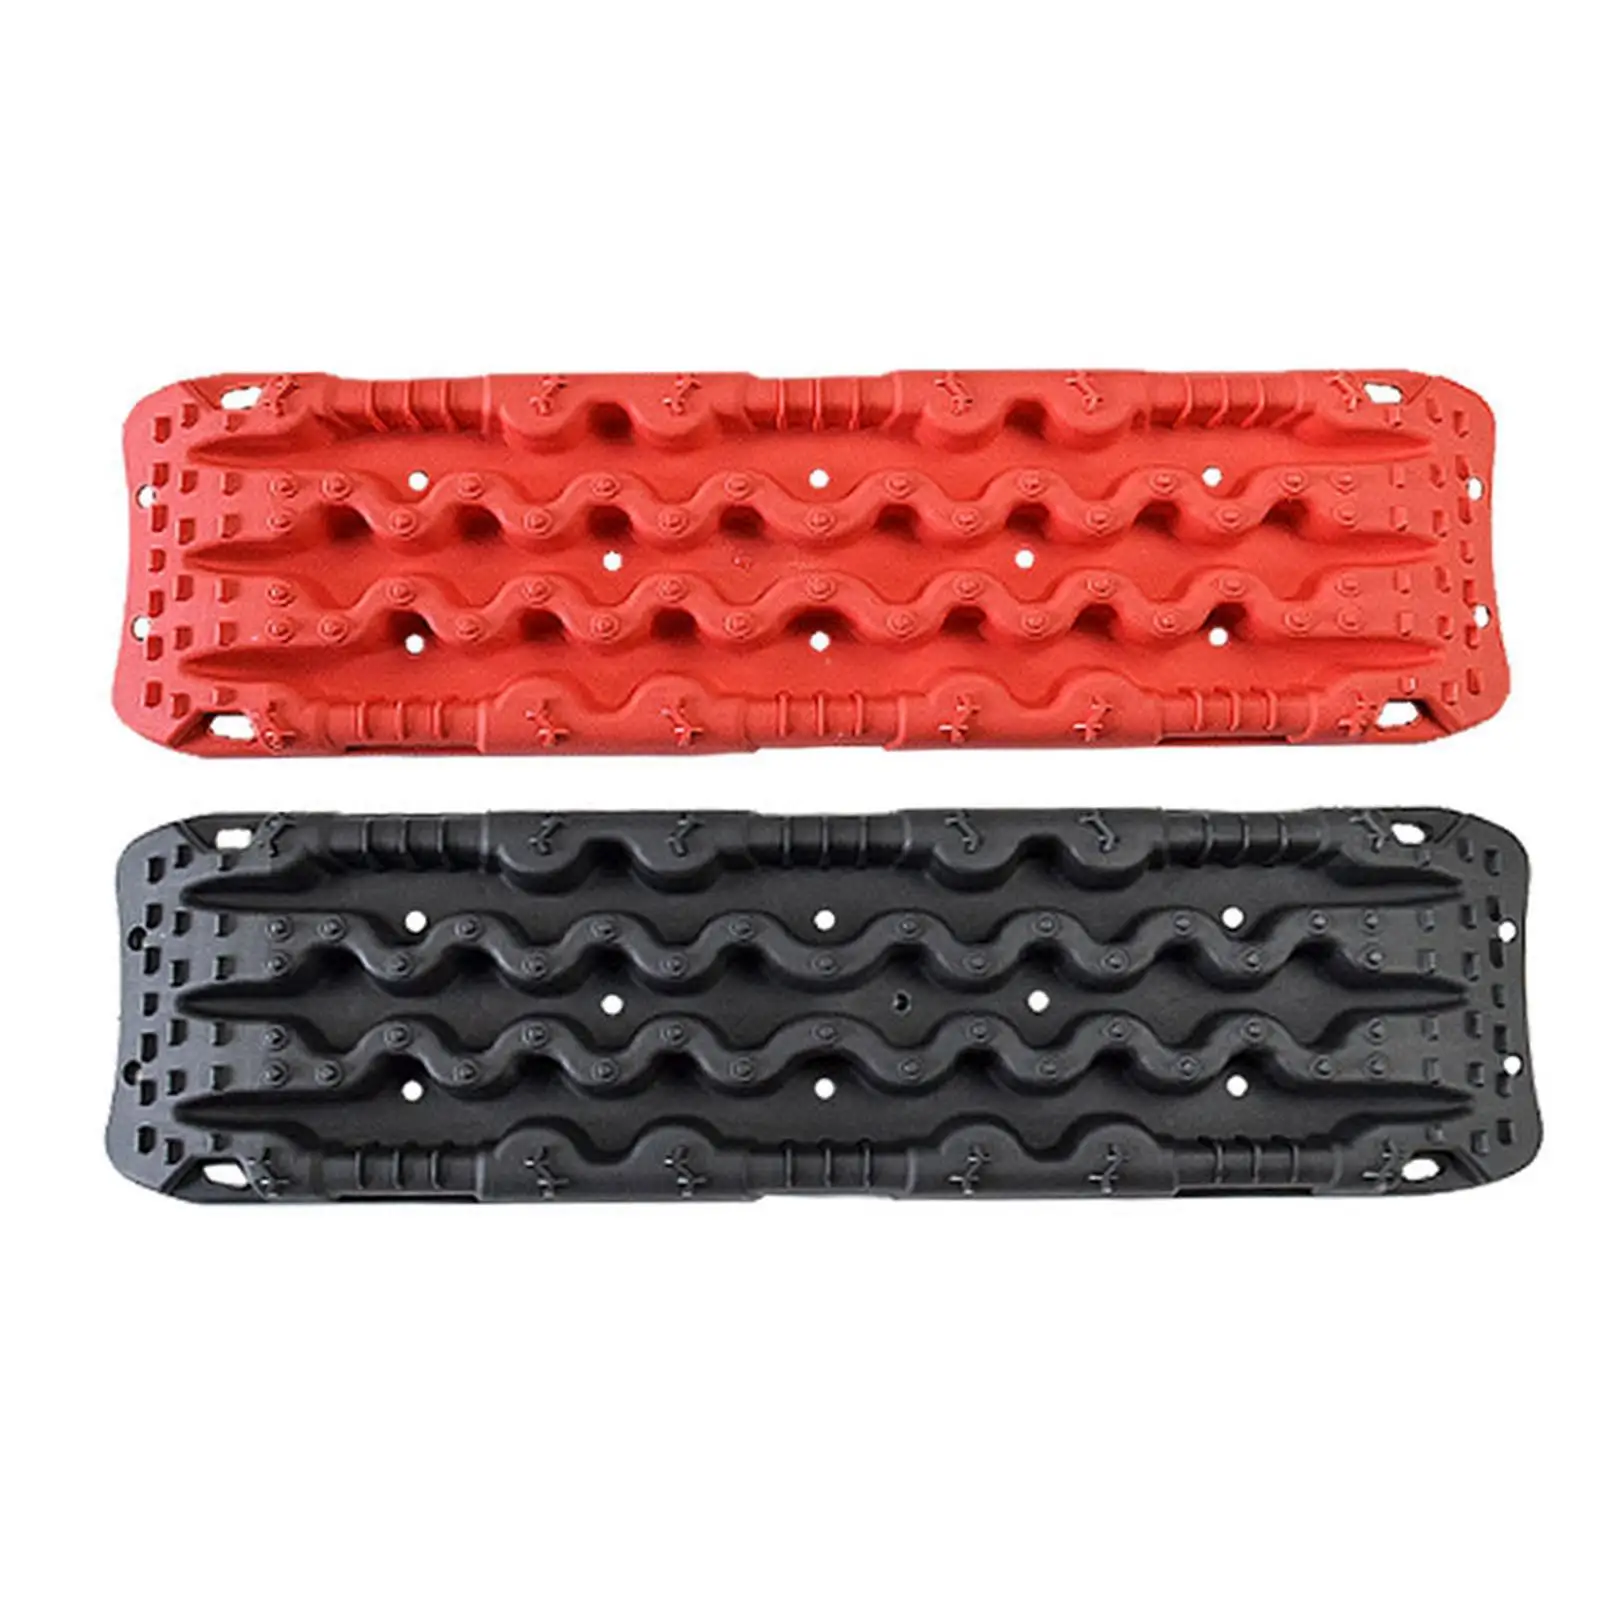 Traction Boards Recovery Traction Tracks Durable Tire Ladder Tire Traction Mat for Truck